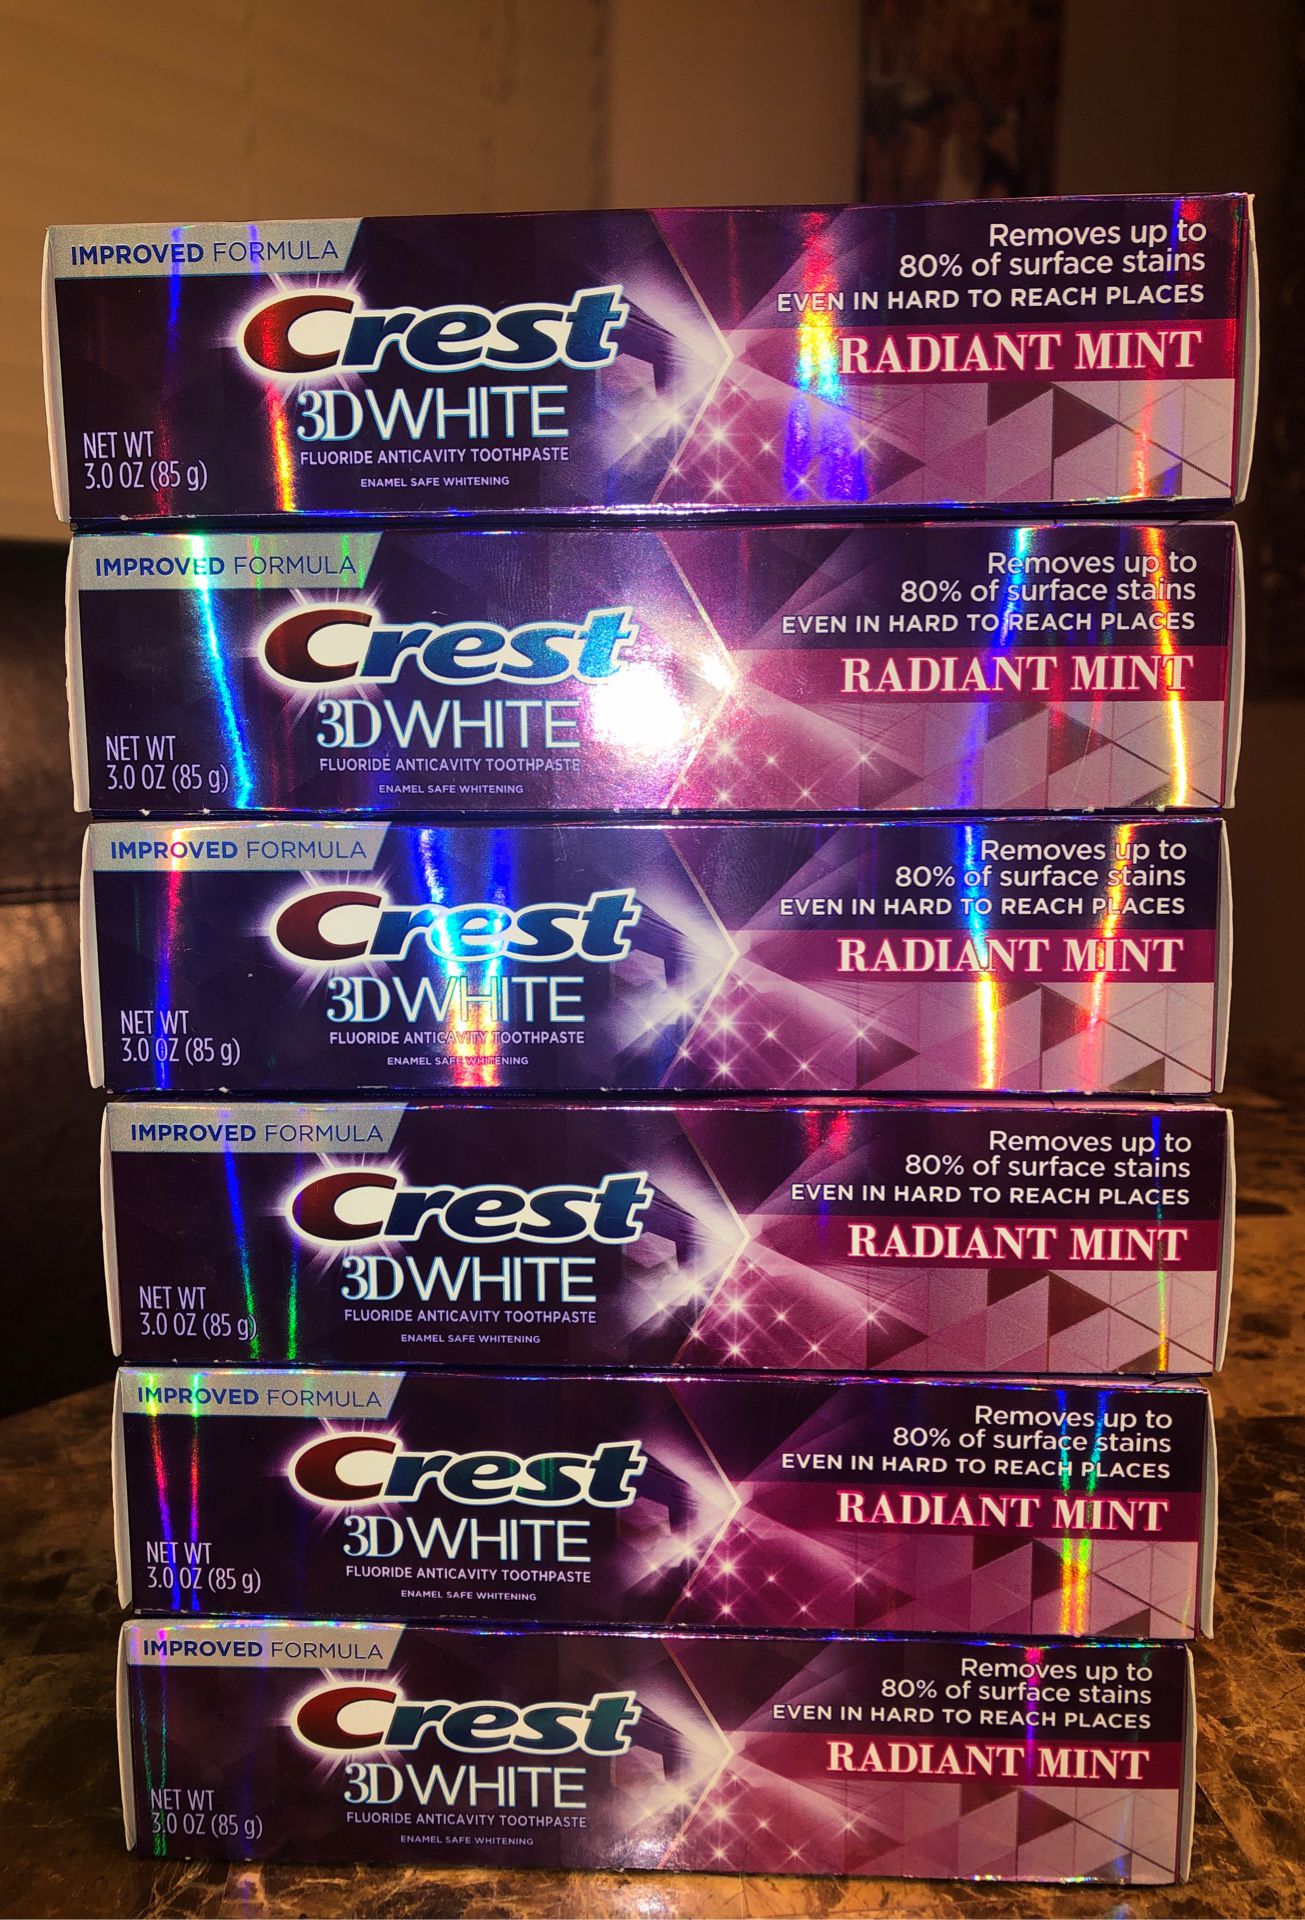 CREST 3D WHITE RADIANT MINT TOOTHPASTE